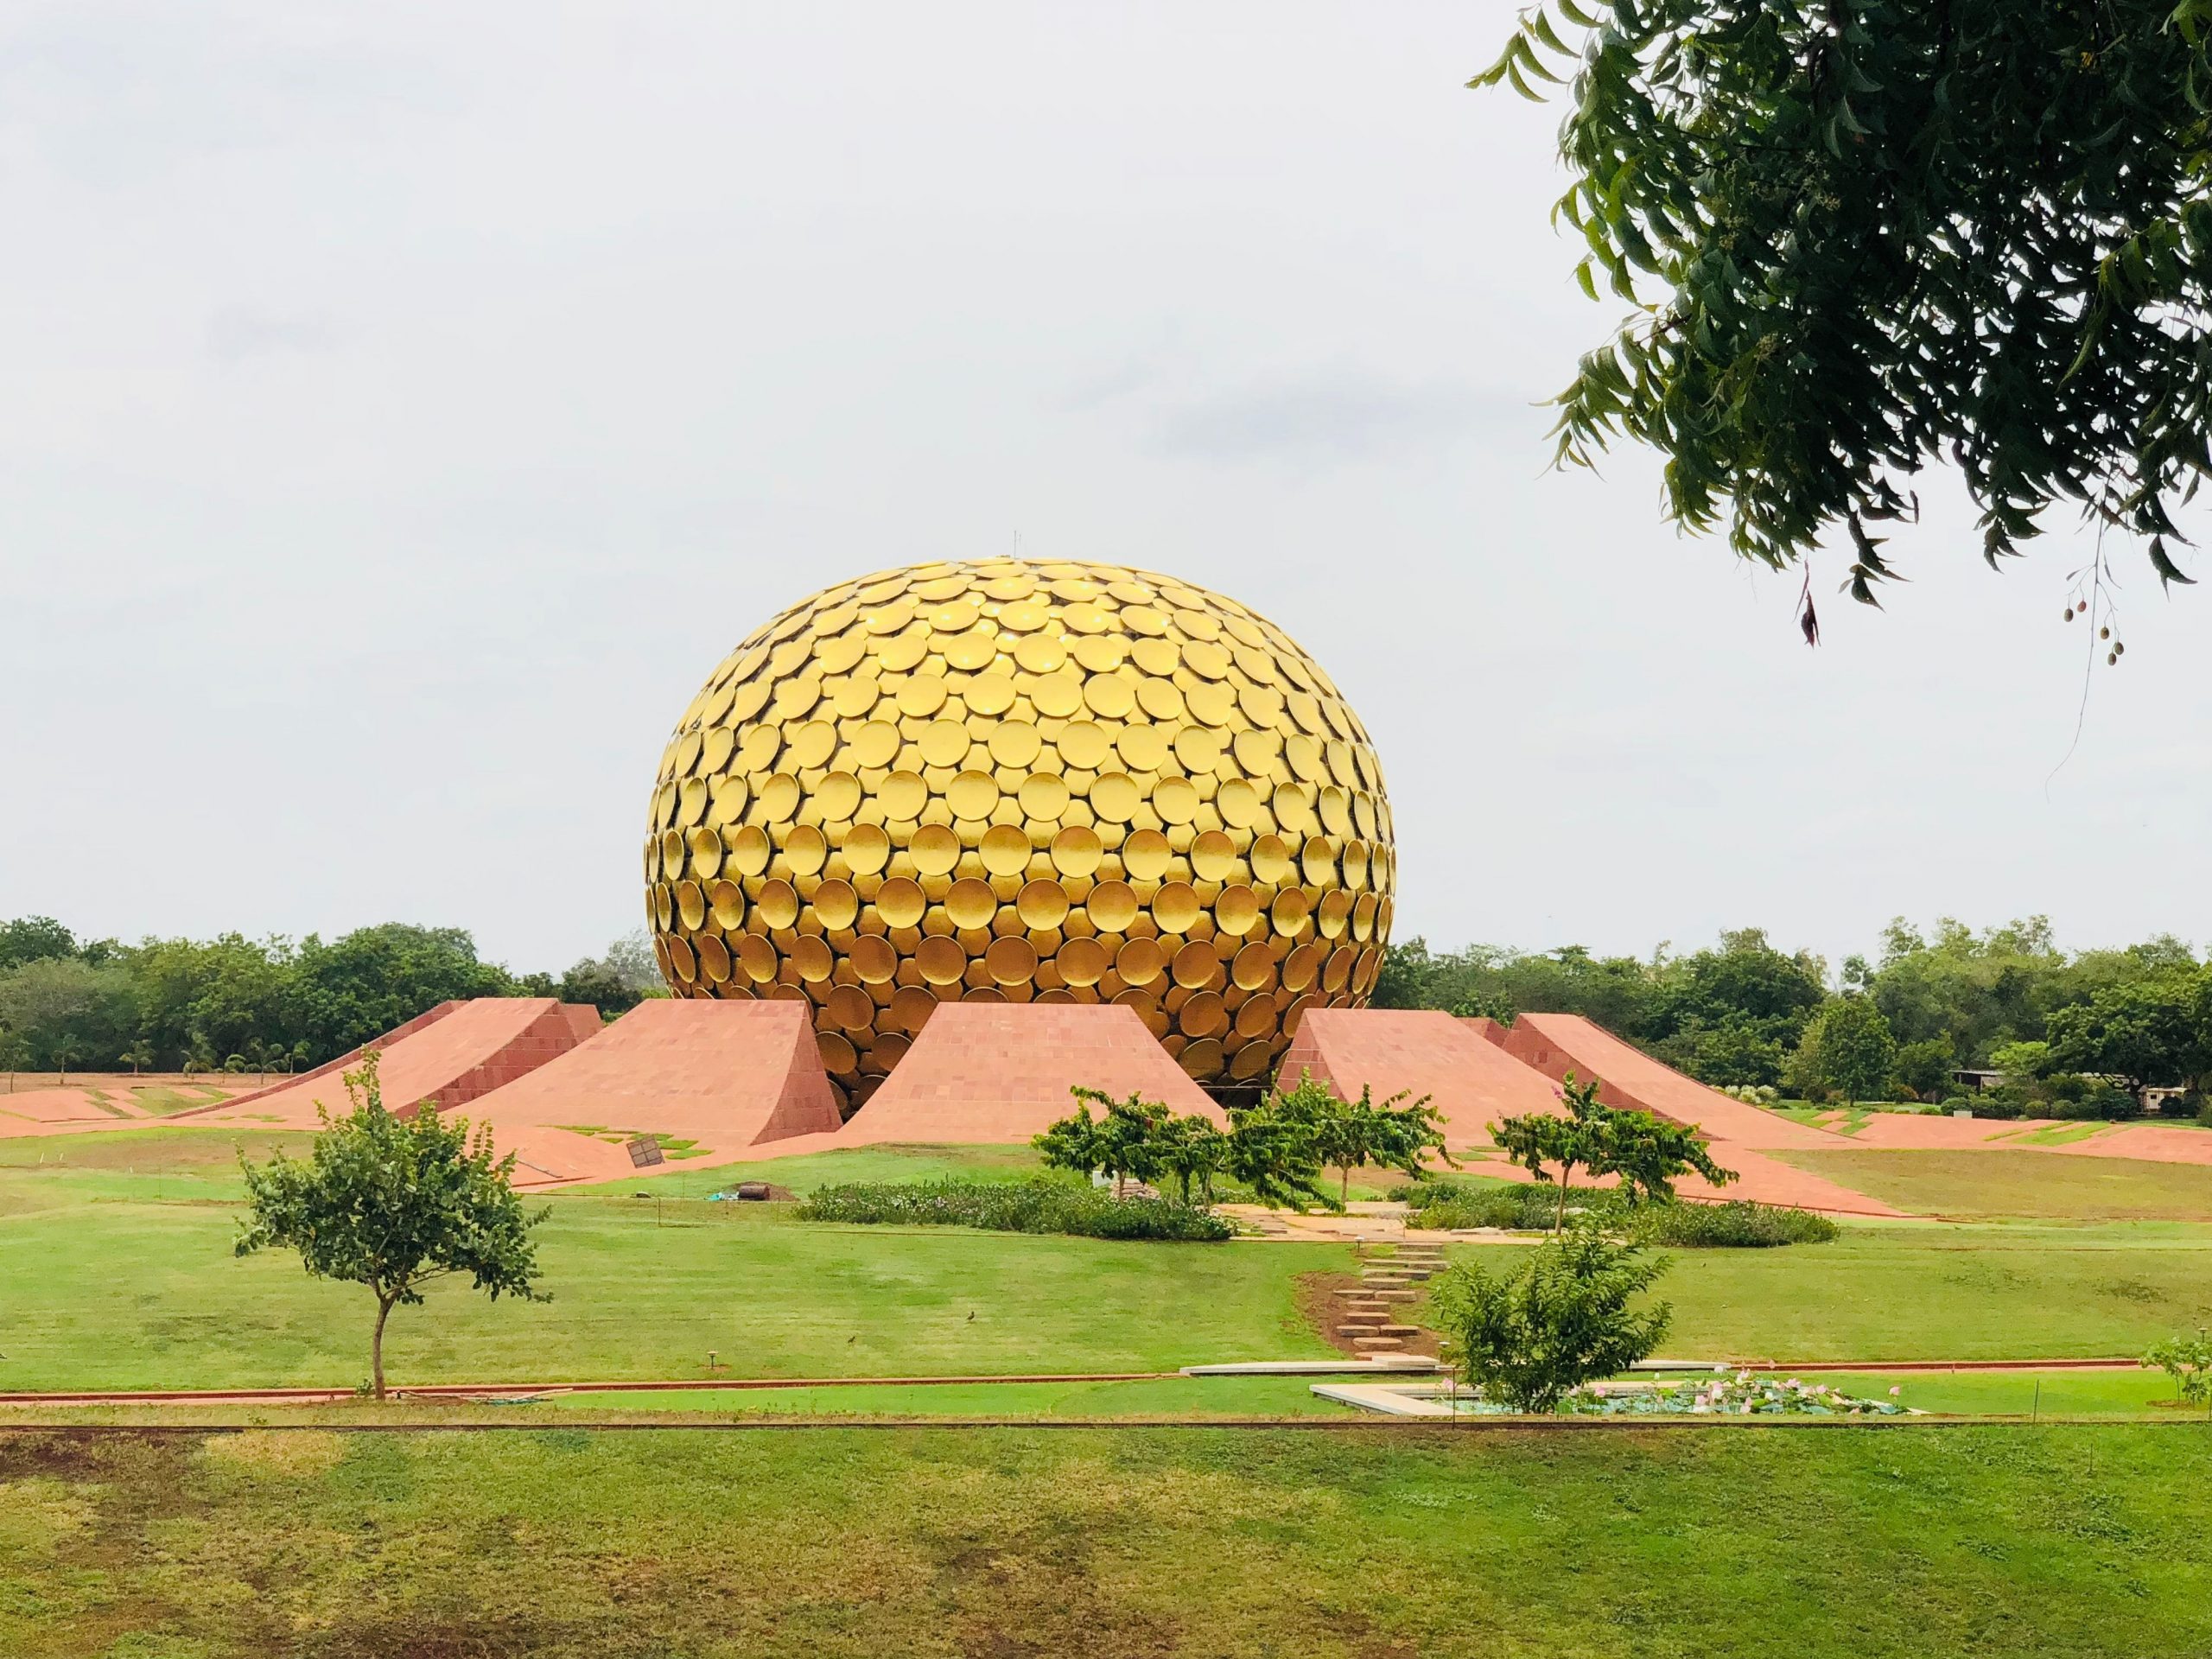 Amazon Quiz: This structure is known as the ___ of the City in Auroville. Fill in the blanks